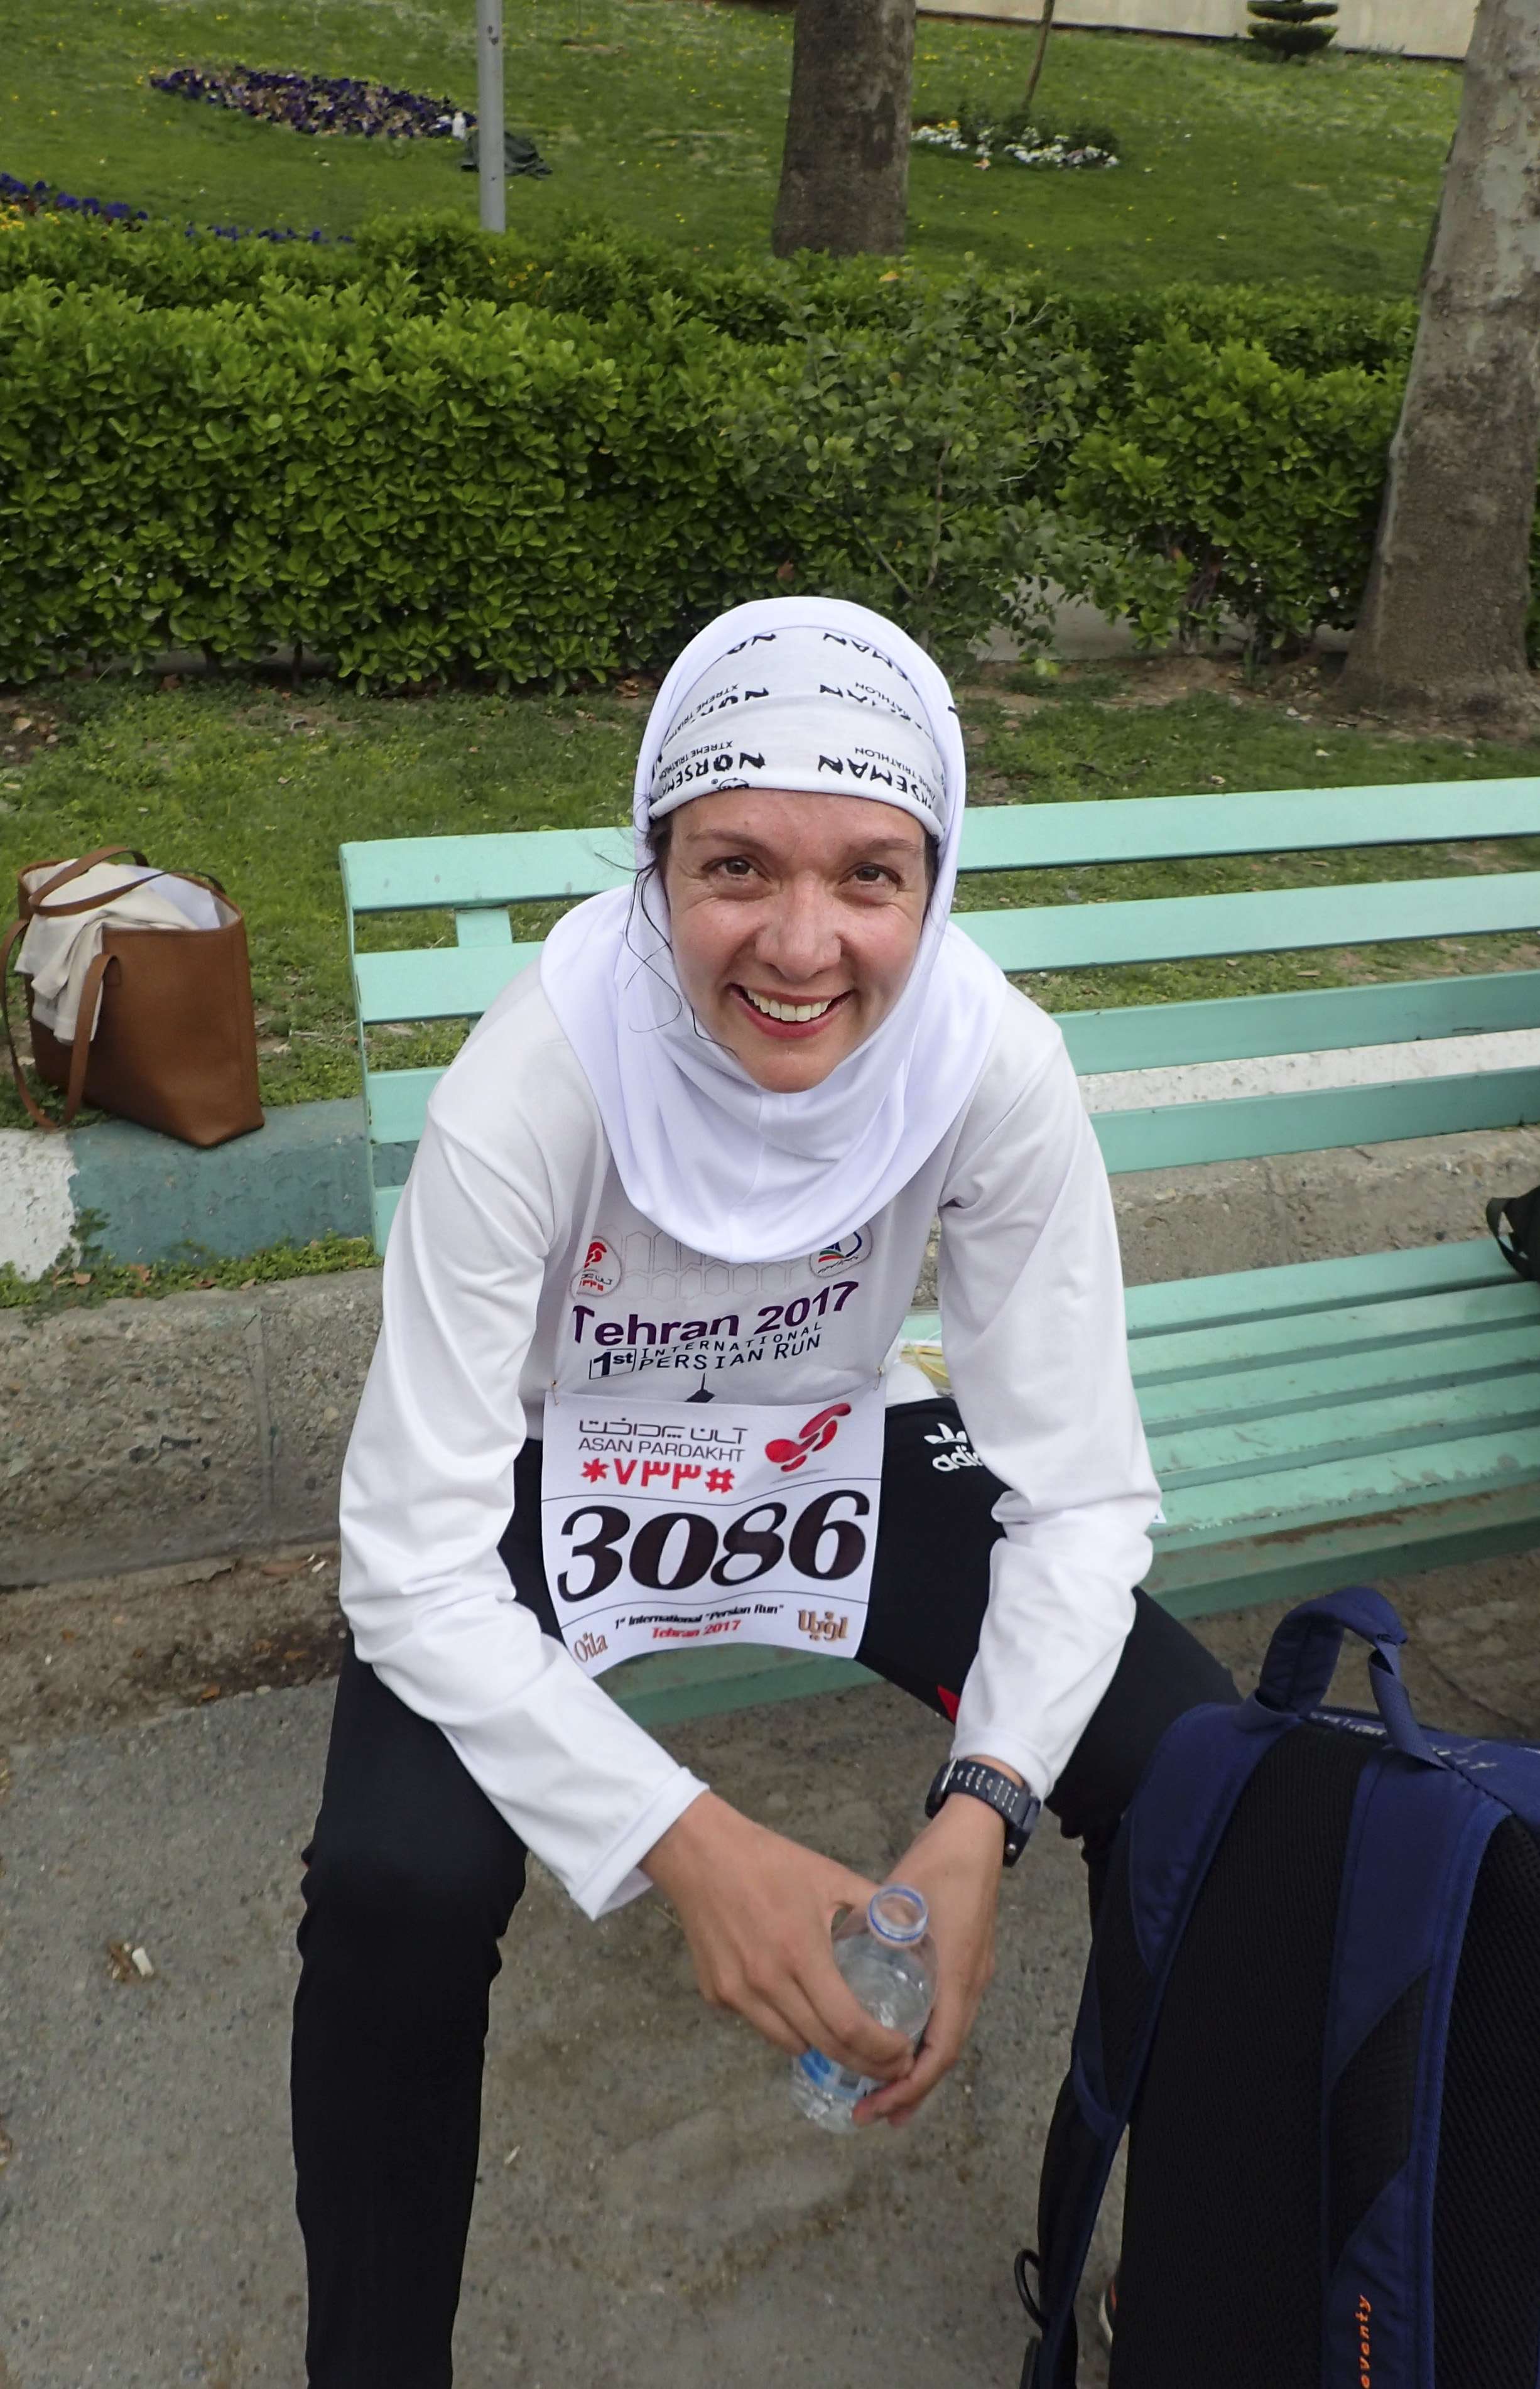 Trilby White went to Tehran to run a marathon, but was told that women were only allowed to participate in the 10km race.